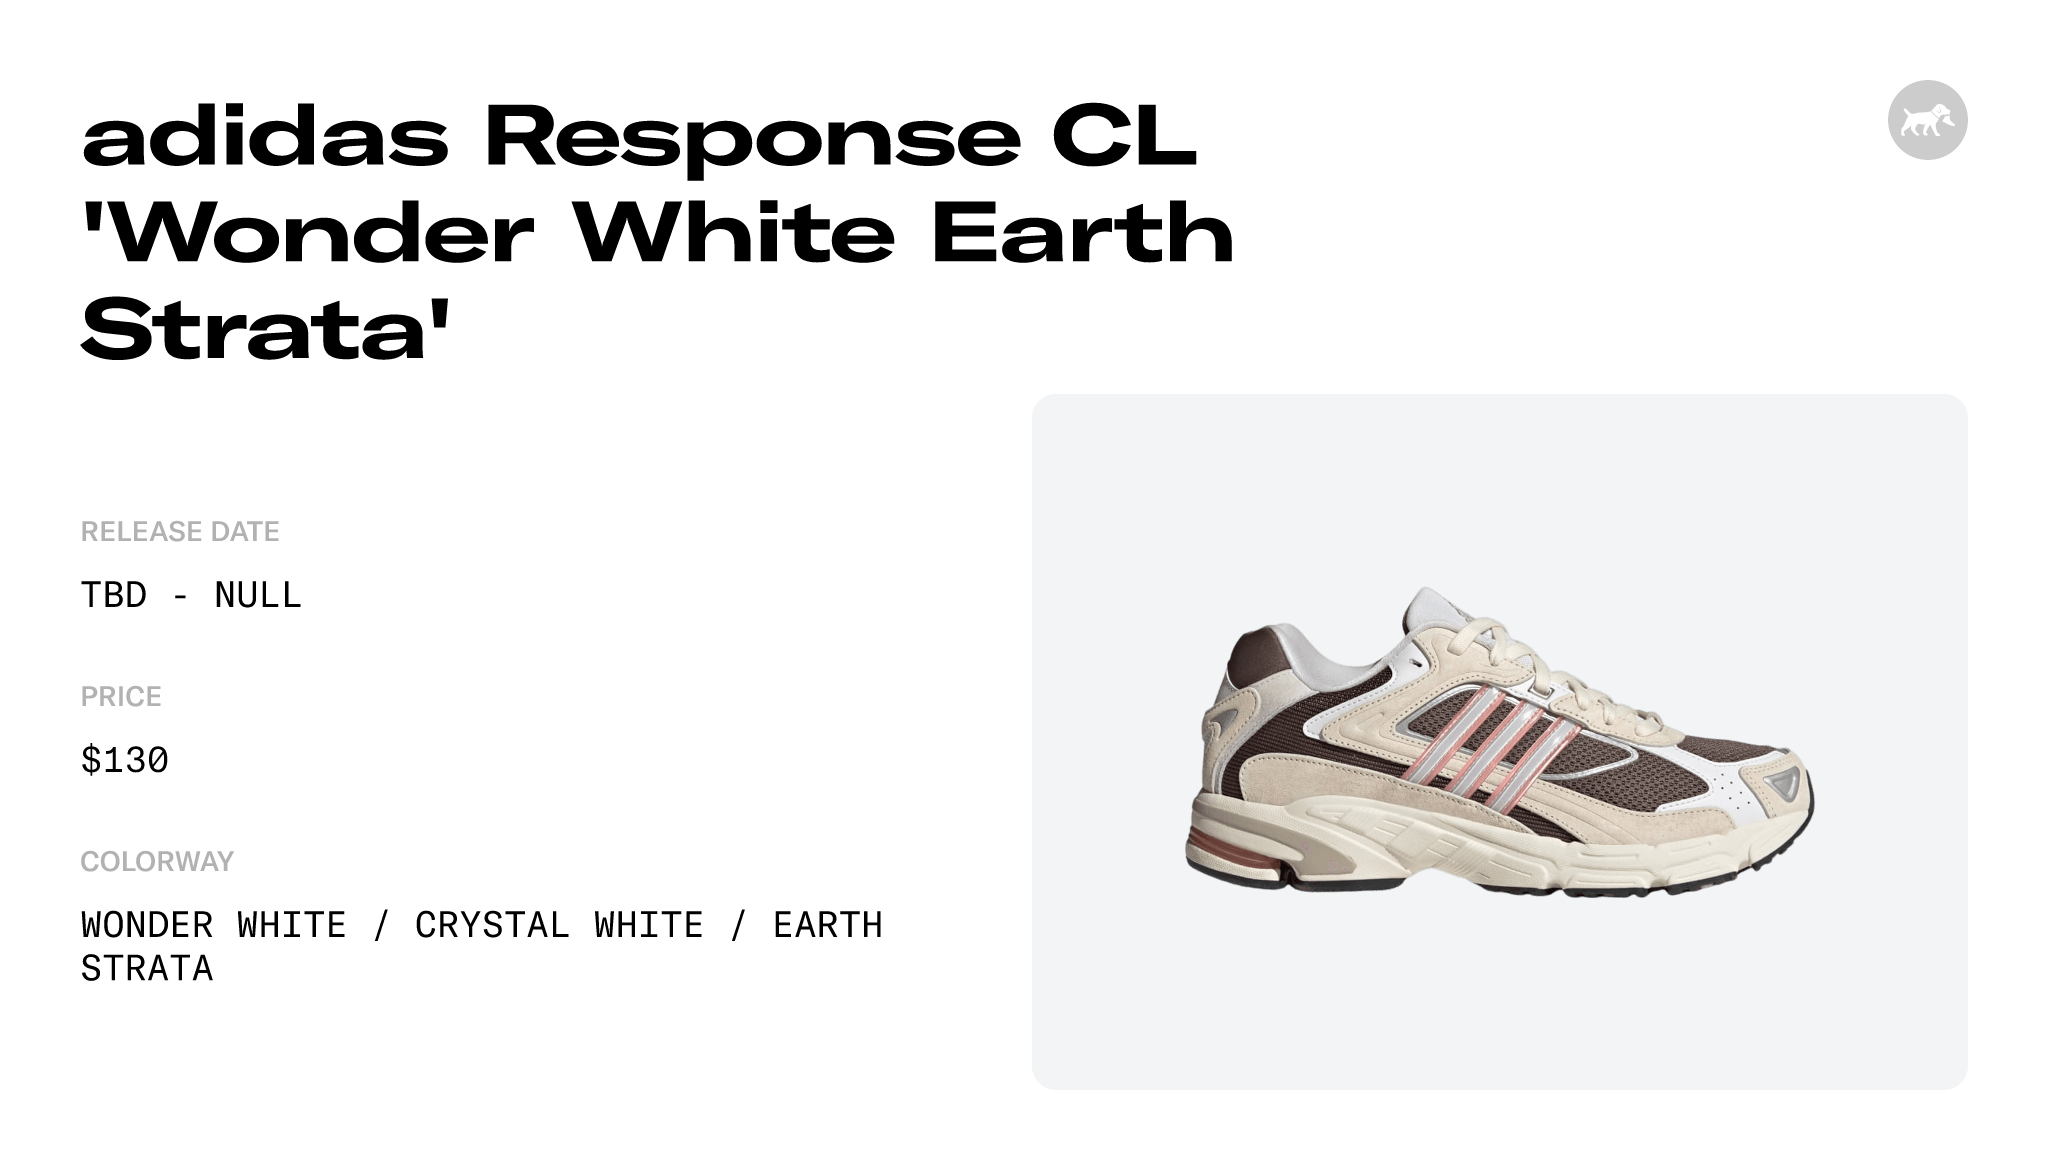 adidas Response White Strata\' Date \'Wonder IG3079 Release - Raffles Earth and CL